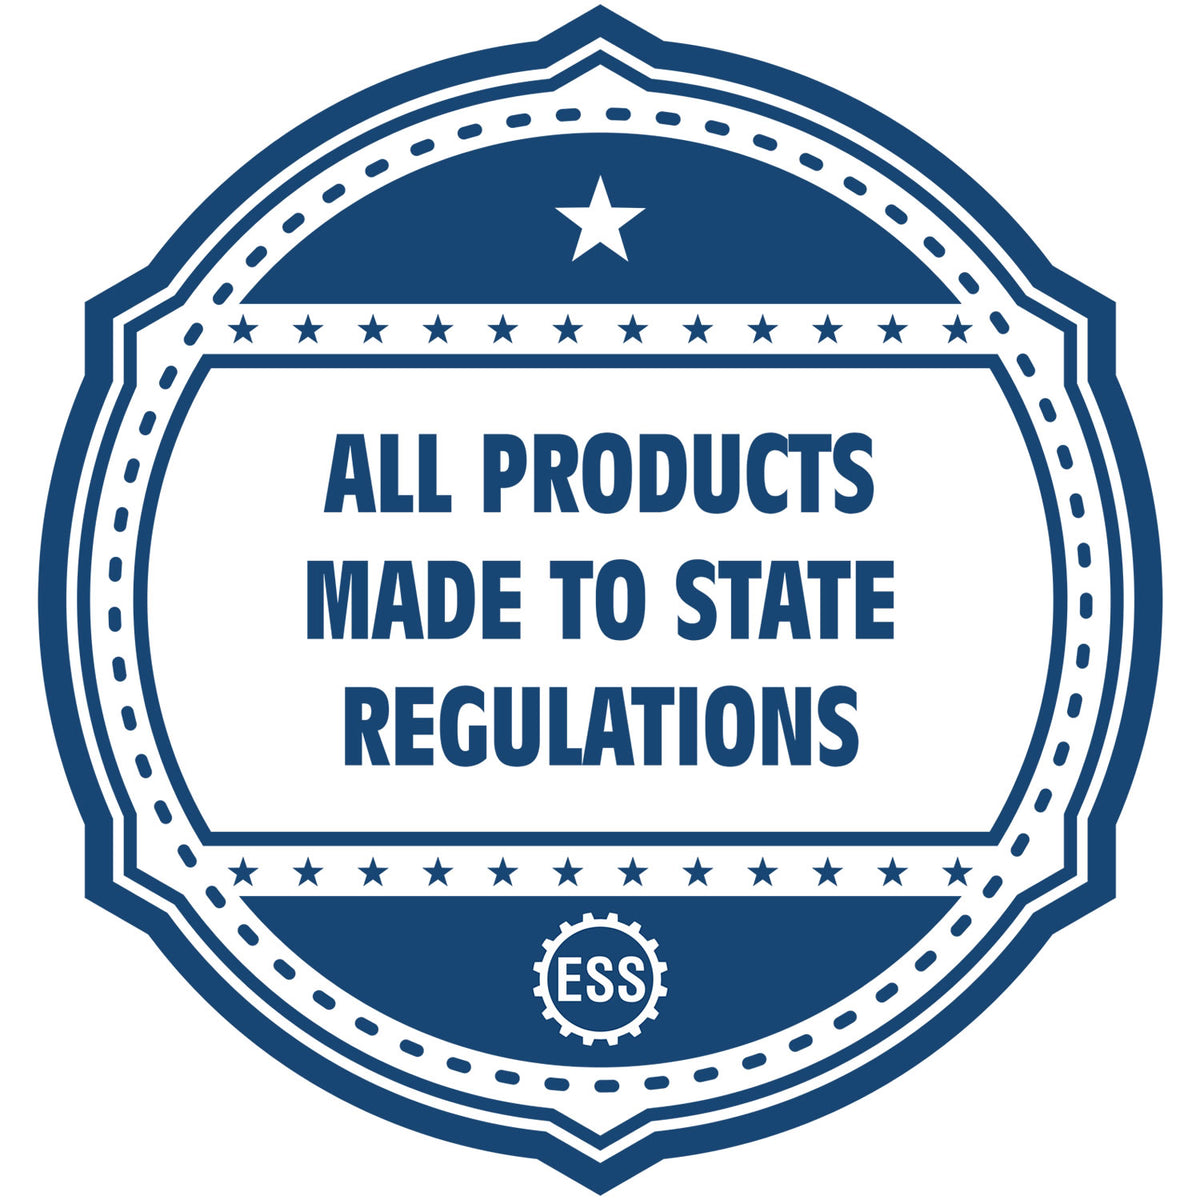 An icon or badge element for the Long Reach Minnesota PE Seal showing that this product is made in compliance with state regulations.